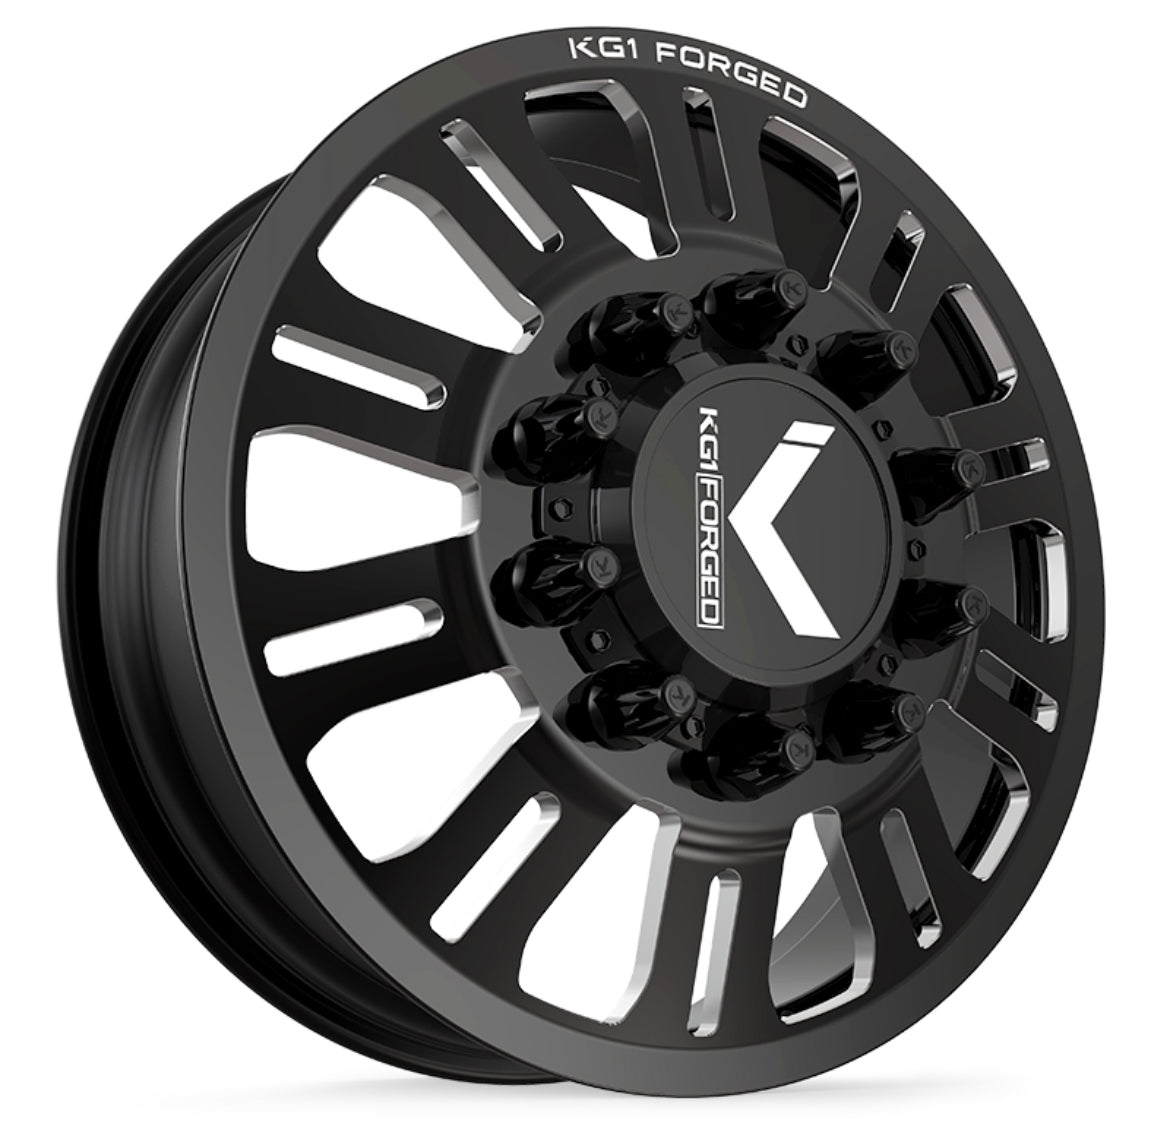 KG1 FORGED DUALLY DUEL